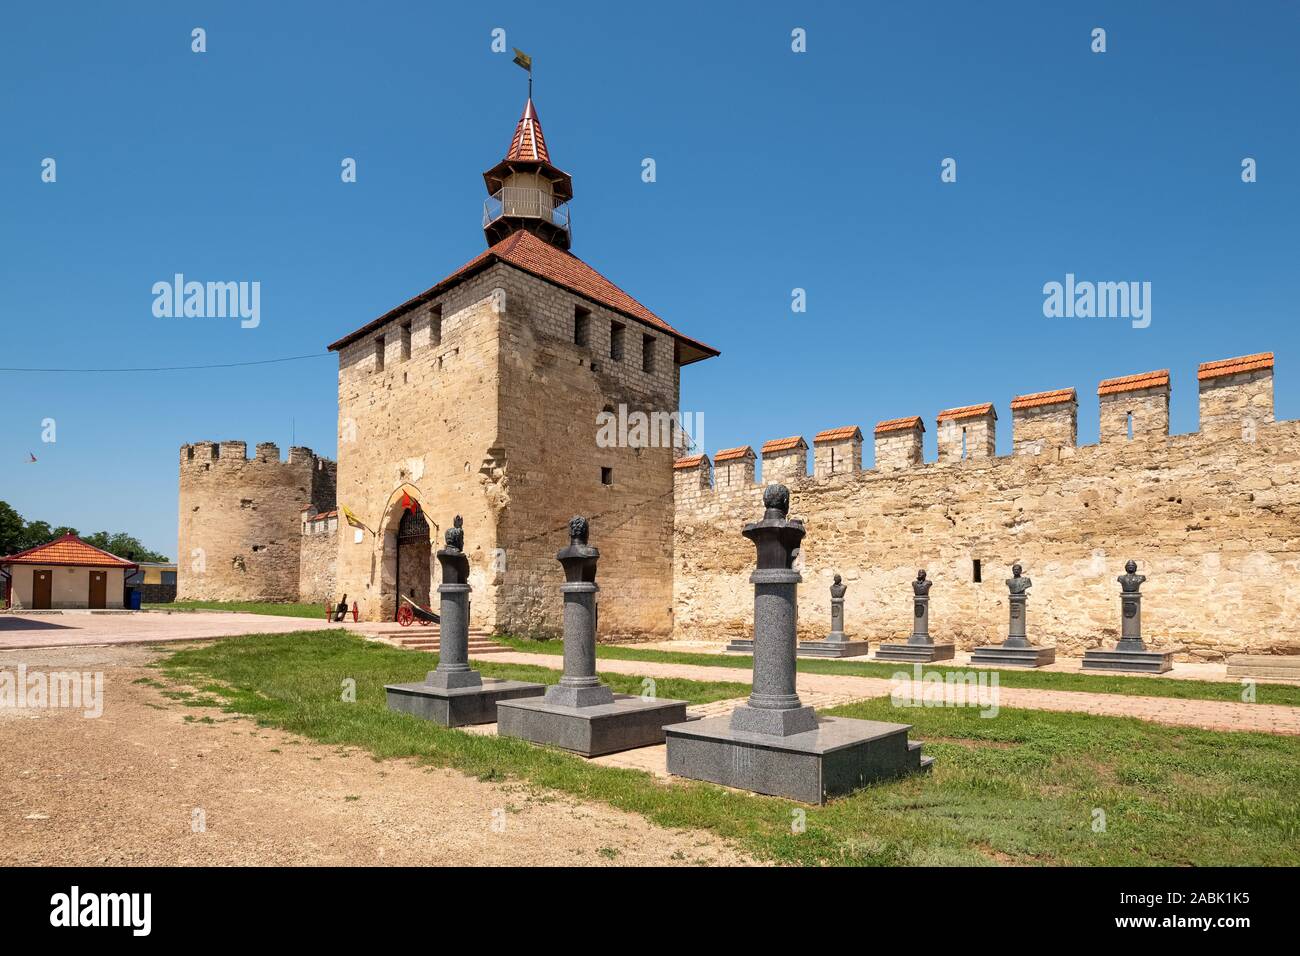 BENDER, MOLDOVA, - JUNE, 13, 2019: Bendery Fortress, an Ottoman fortress with walkable ramparts & several museums in Bender, Moldova. Stock Photo